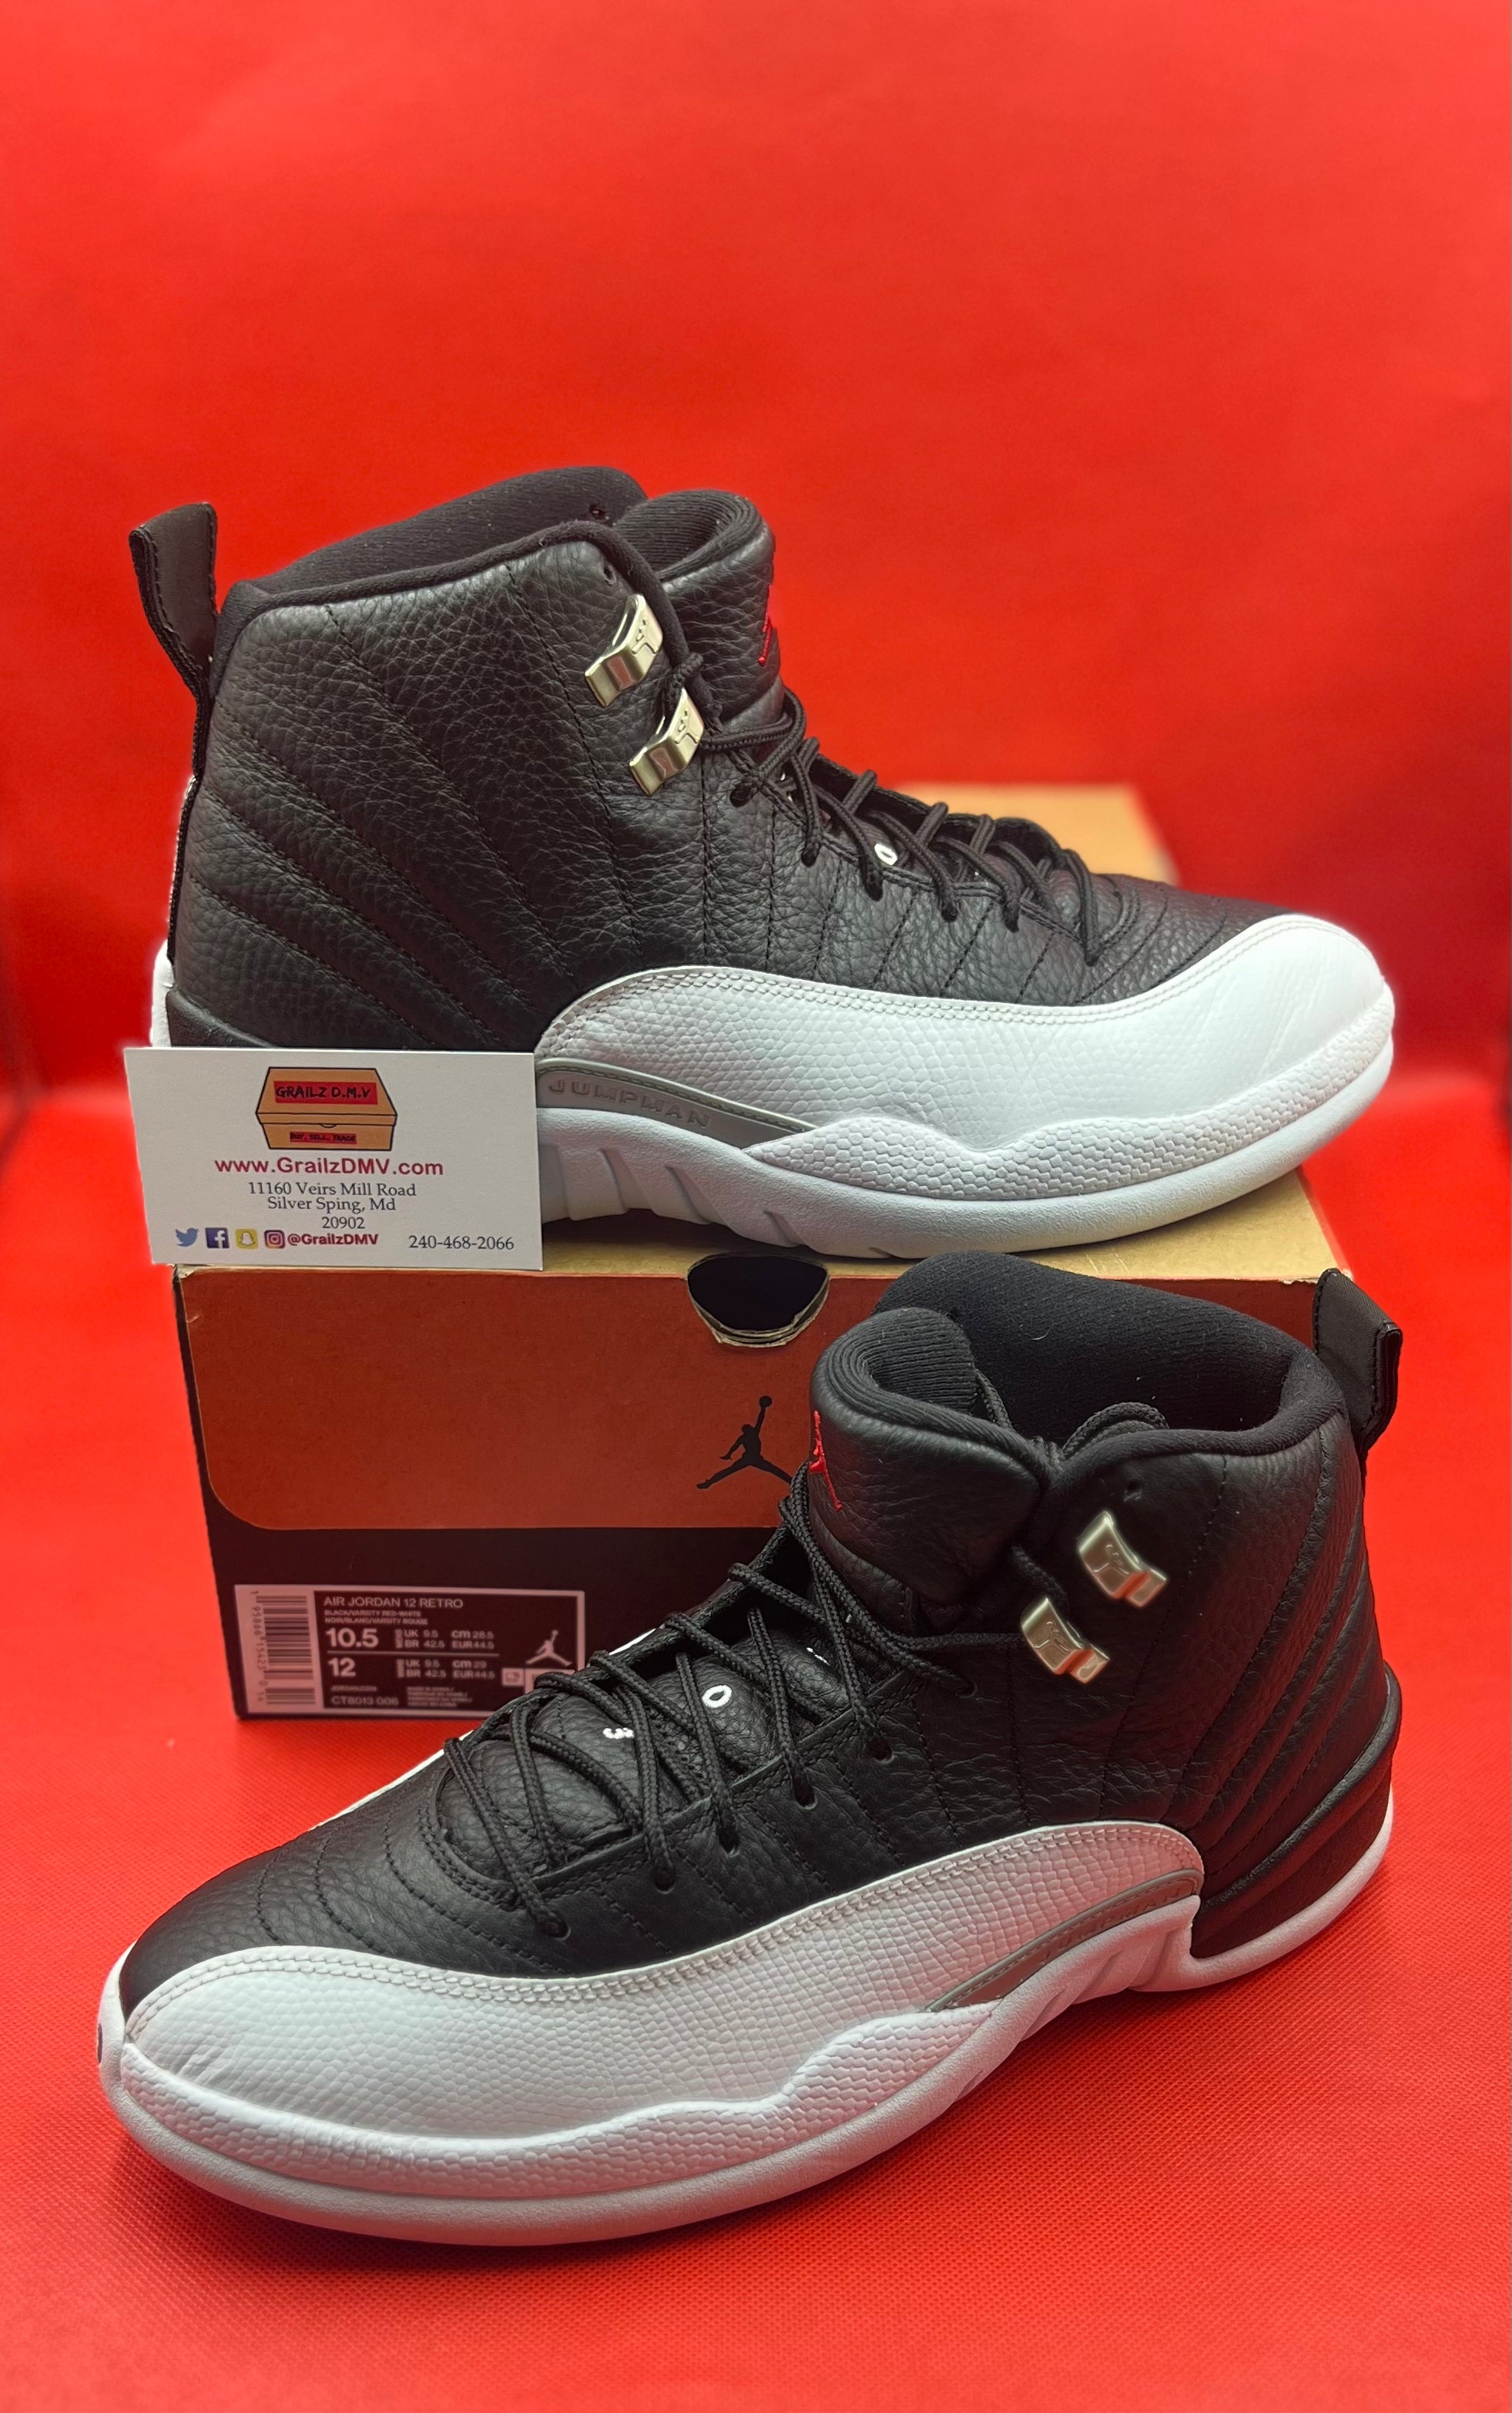 Playoff 12s Size 10.5